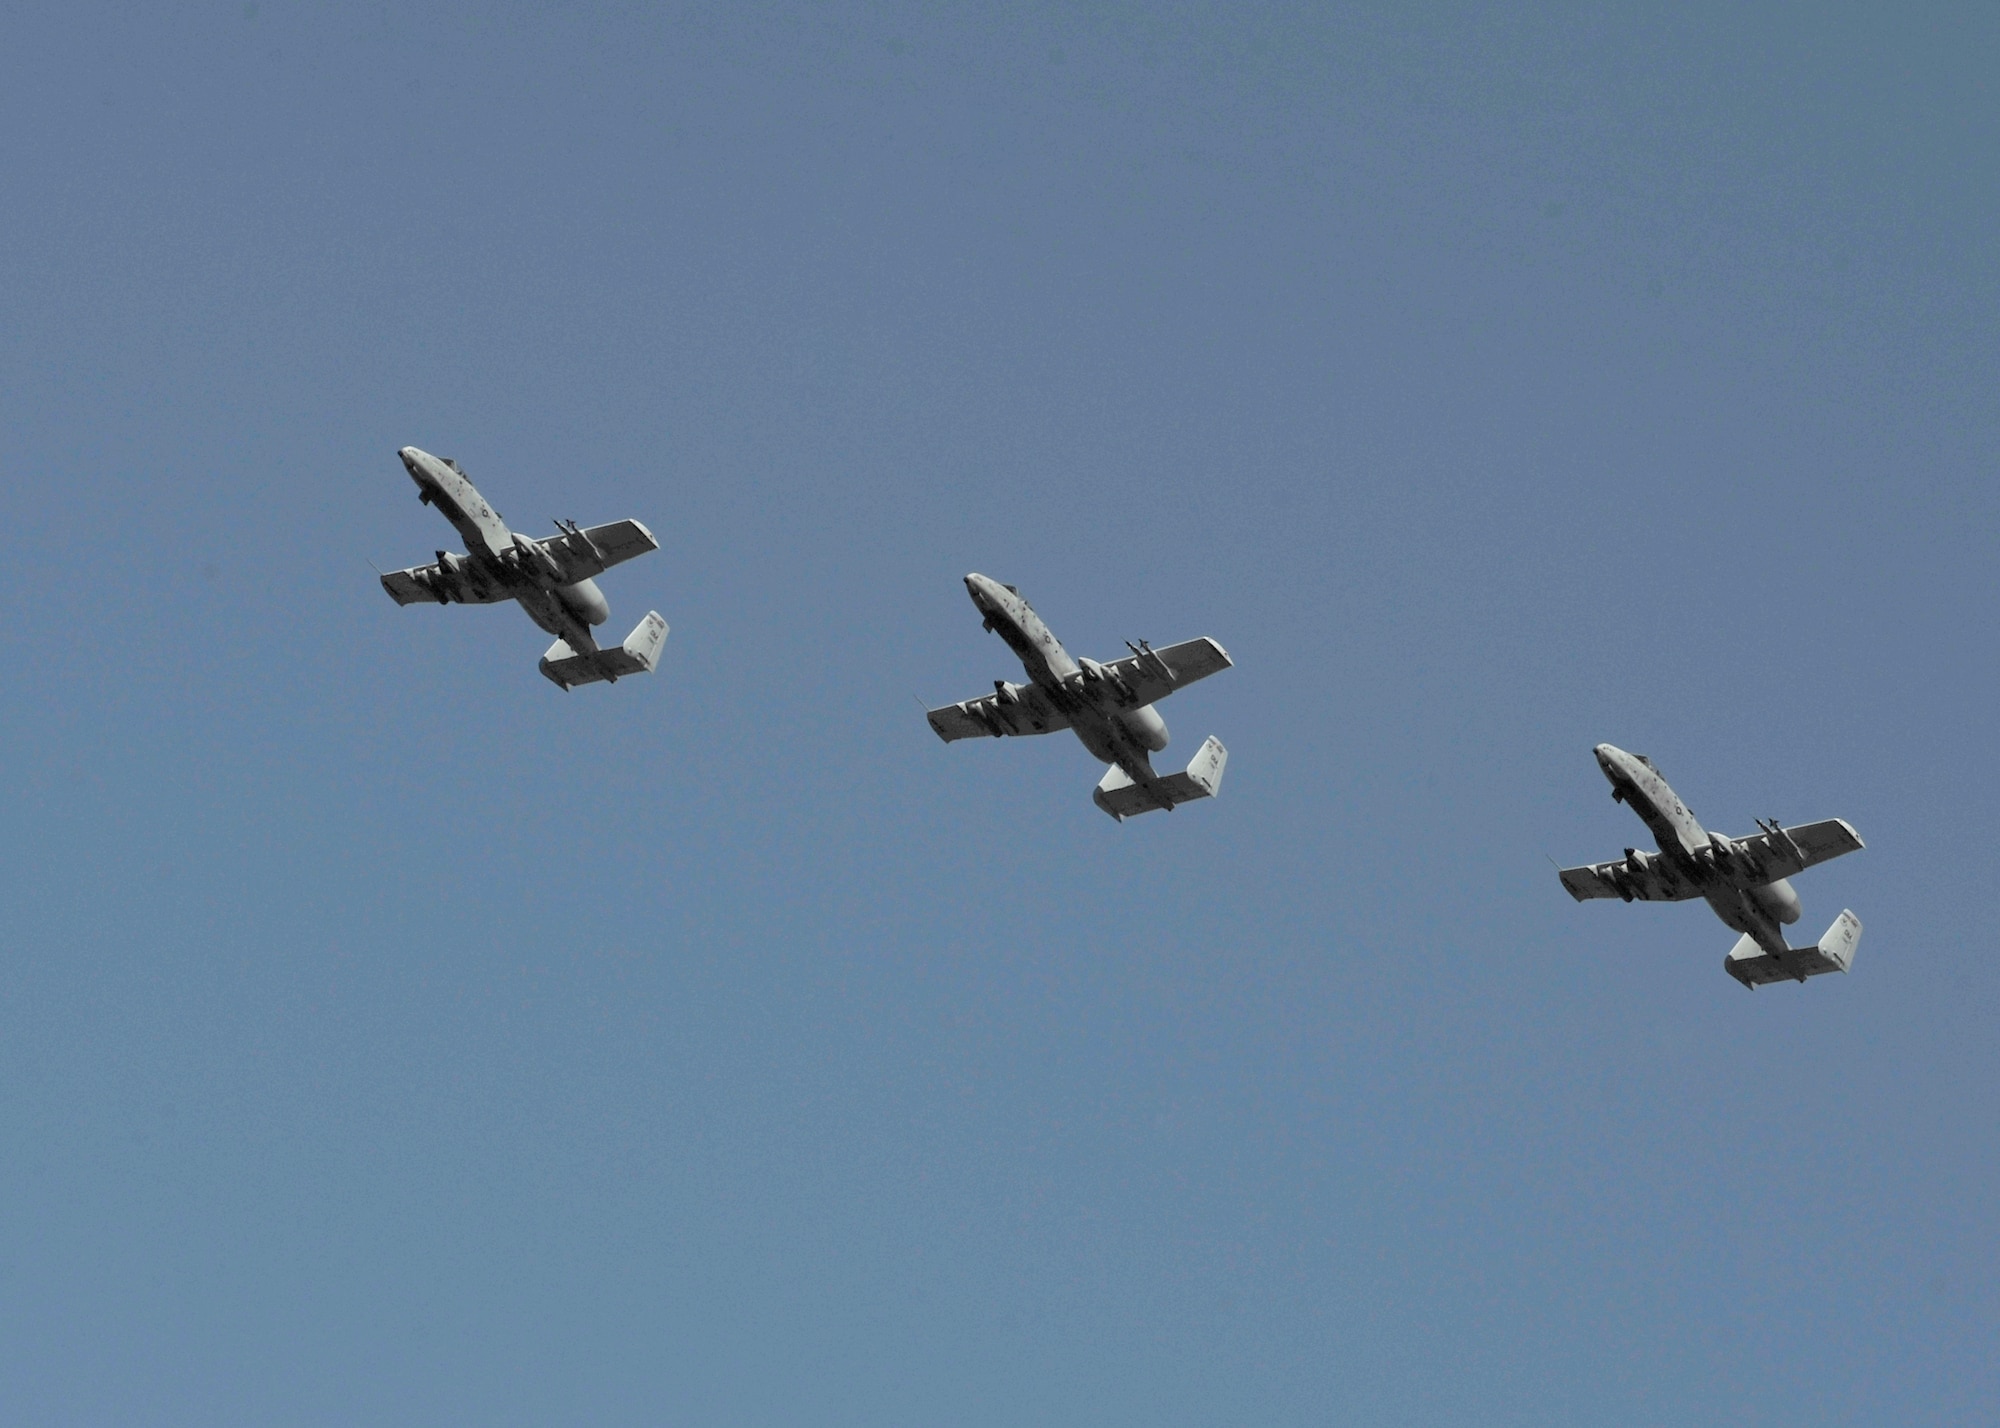 Three A-10 Thunderbolts assigned to the 354th Fighter Squadron, Davis-Monthan Air Force Base, Ariz., fly in formation during RED FLAG-Alaska 14-1 May 14, 2014, Eielson Air Force Base, Alaska. A-10s are simple, effective and survivable twin-engine jet aircraft that can be used against all ground targets, including tanks and other armored vehicles. (U.S. Air Force photo by Senior Airman Ashley Nicole Taylor/Released)